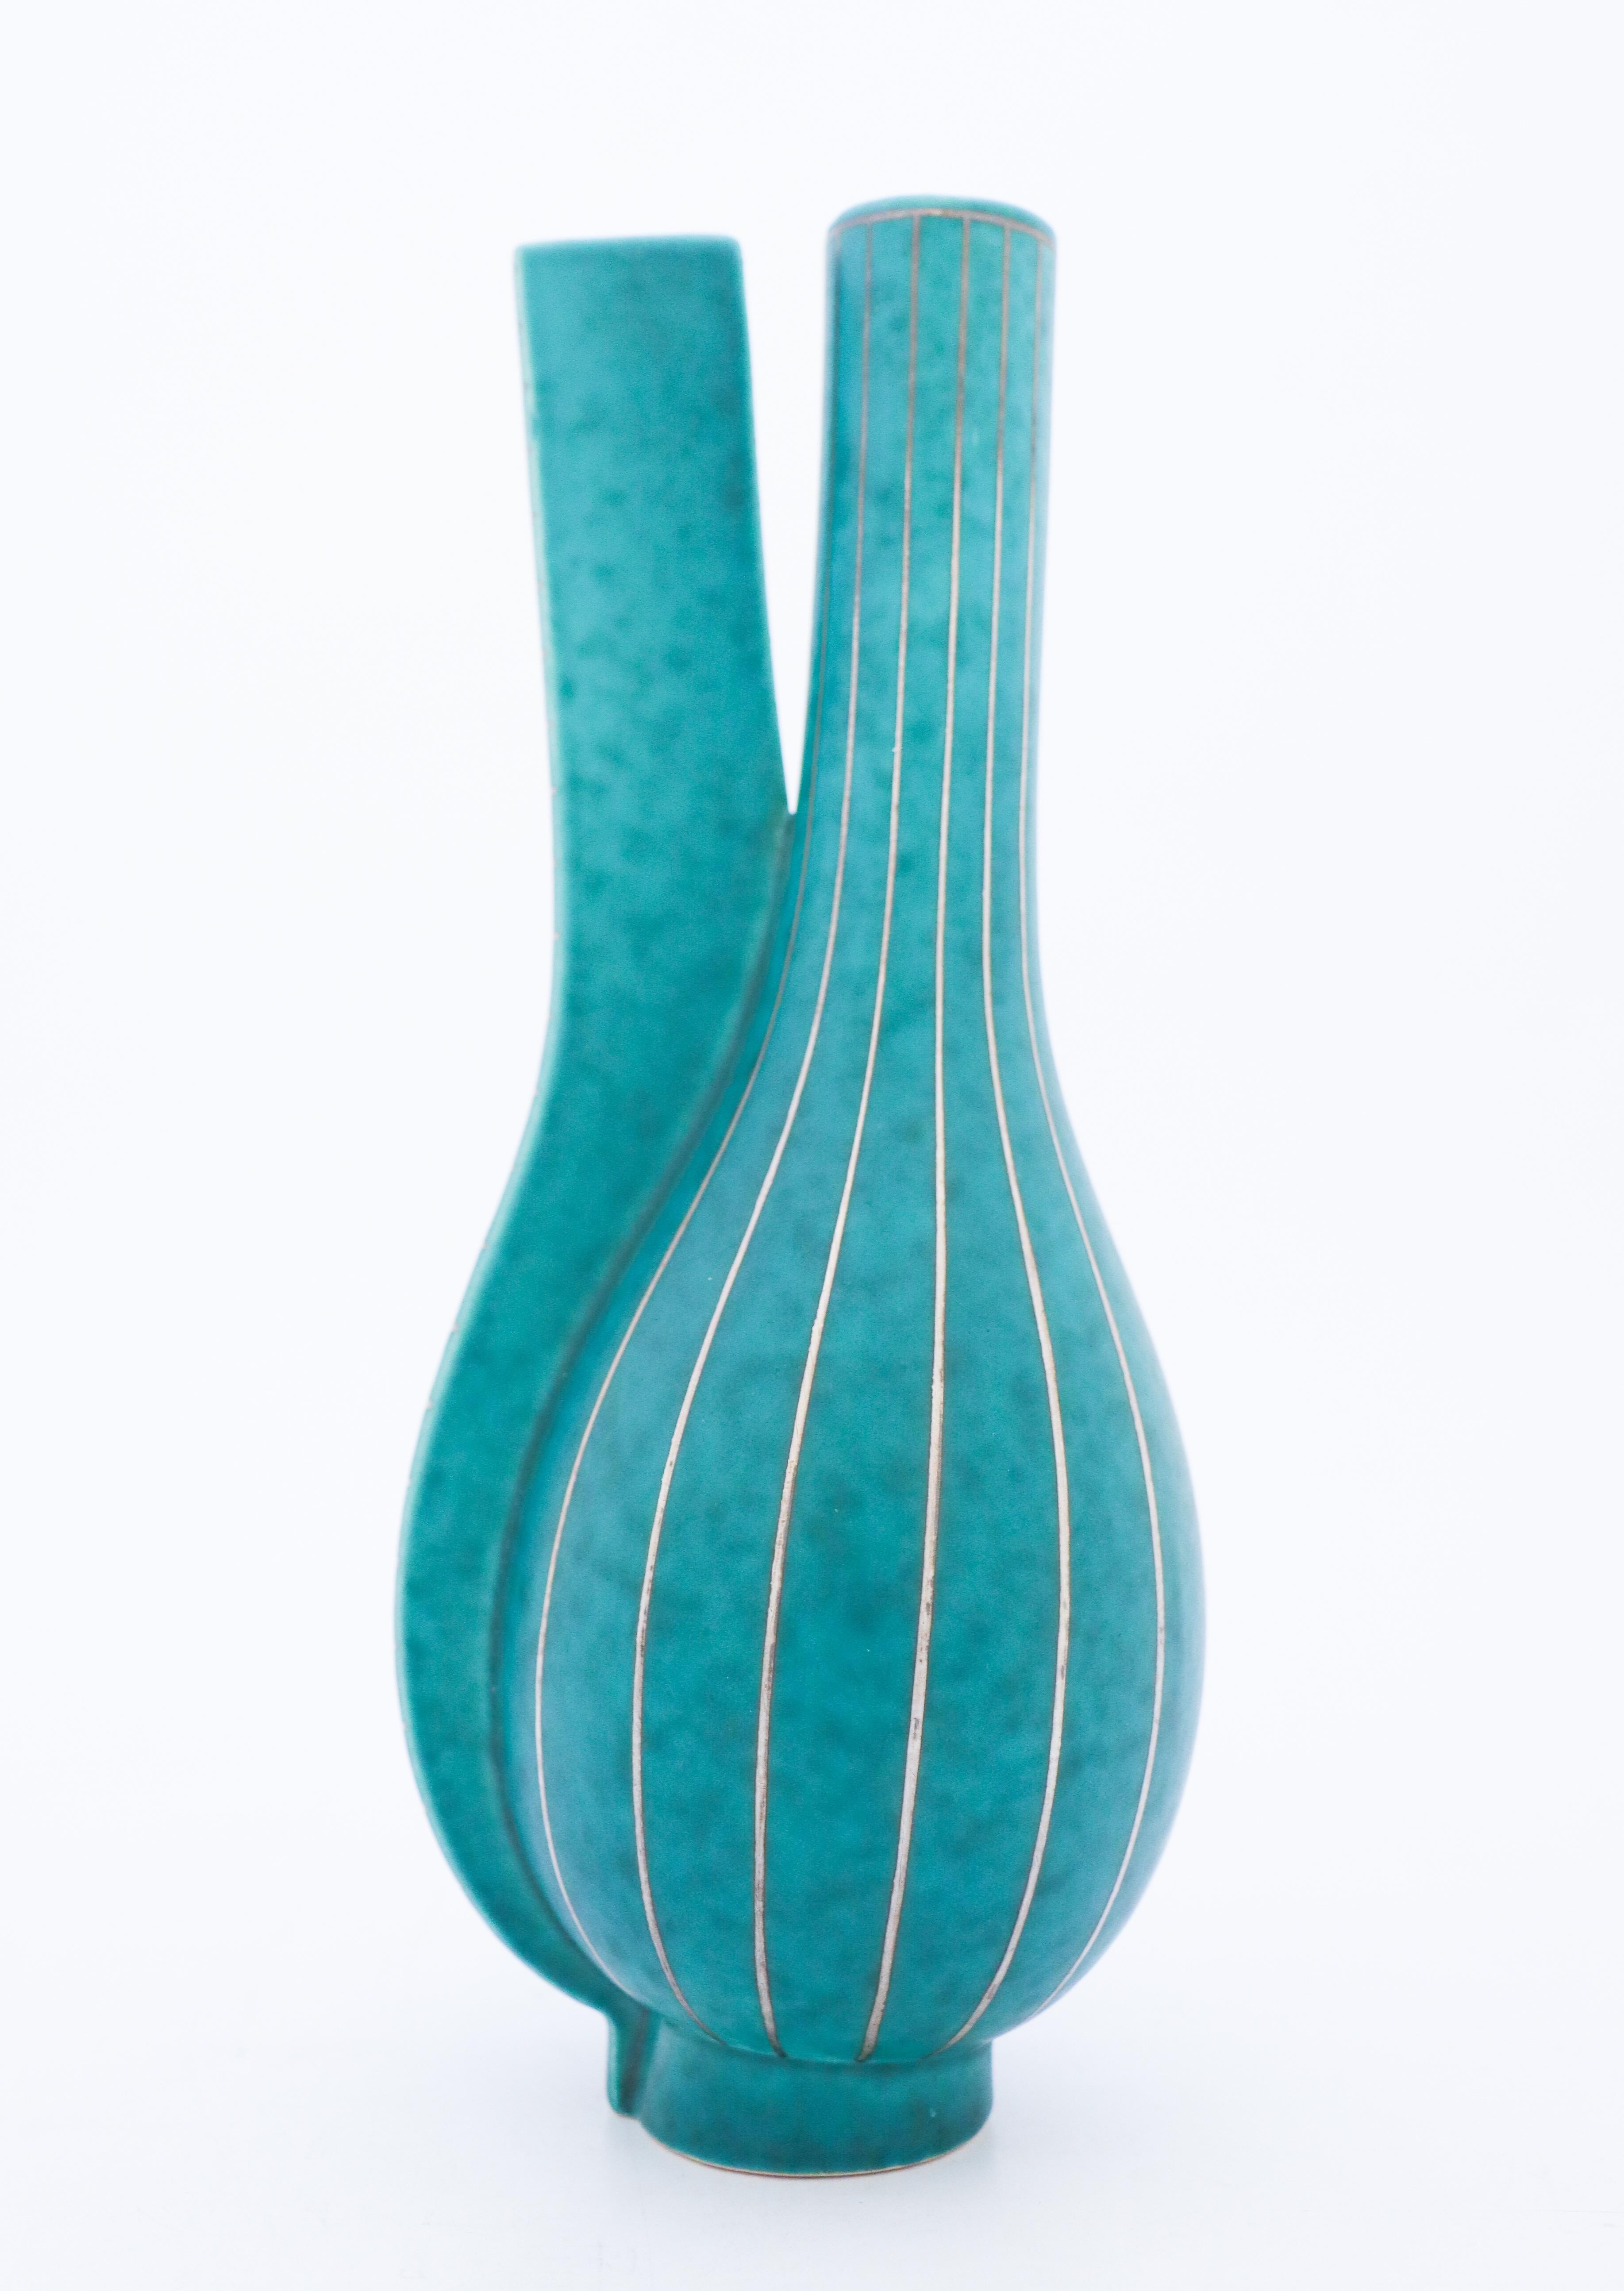 A very rare double vase of model Argenta / Surrea, designed by Wilhelm Kåge at Gustavsberg. The vase is green with a silver decor.